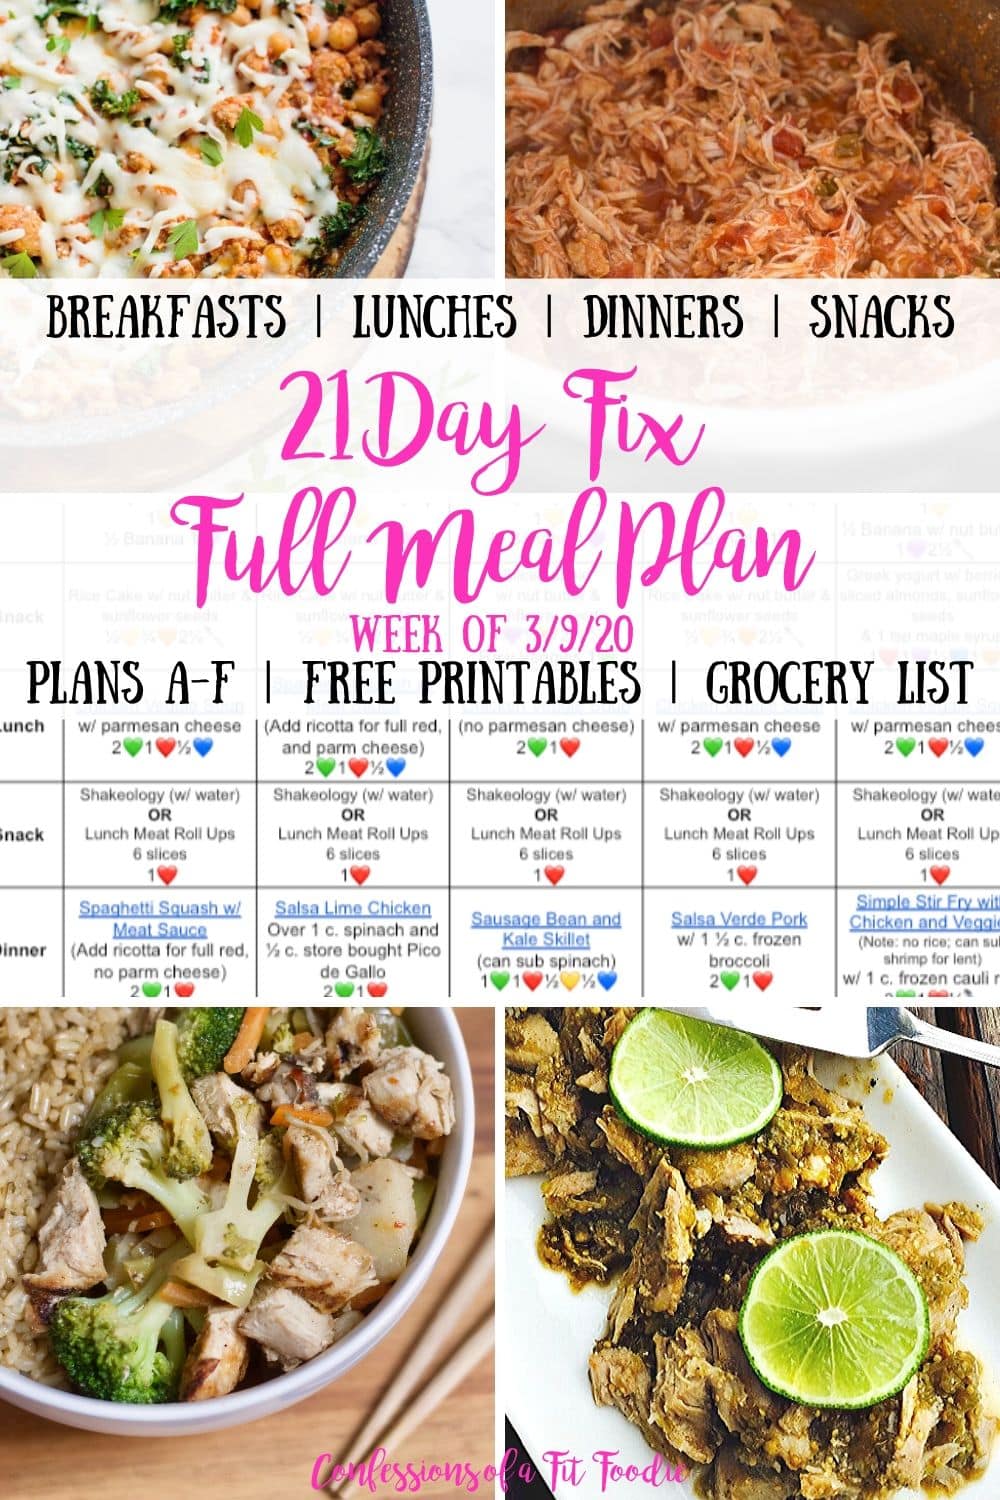 21 Day Fix Meal Plan for the Whole Family - Peanut Blossom